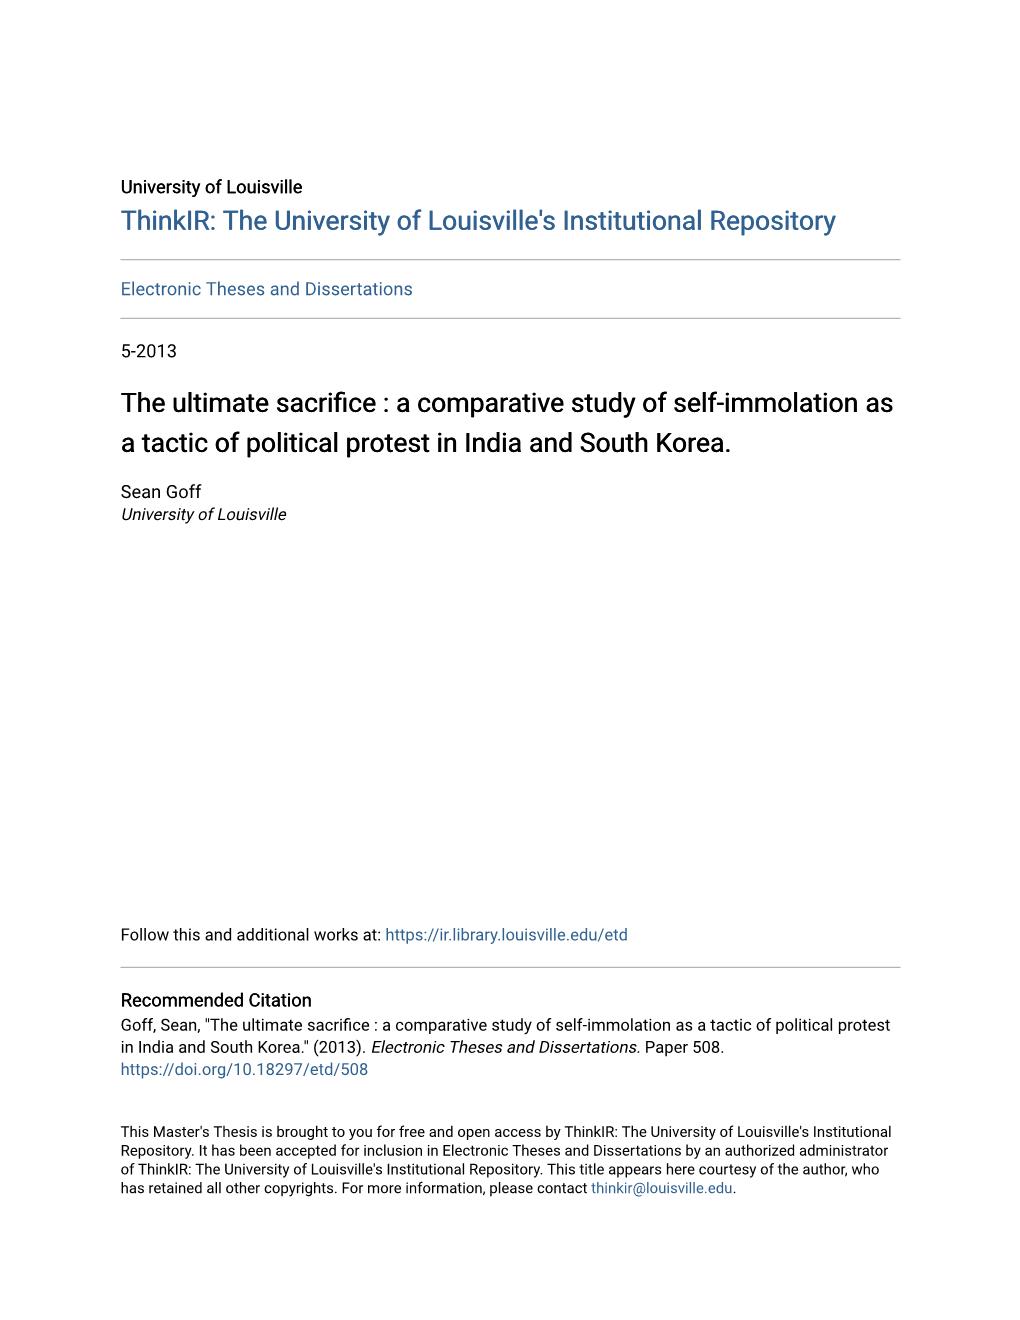 A Comparative Study of Self-Immolation As a Tactic of Political Protest in India and South Korea